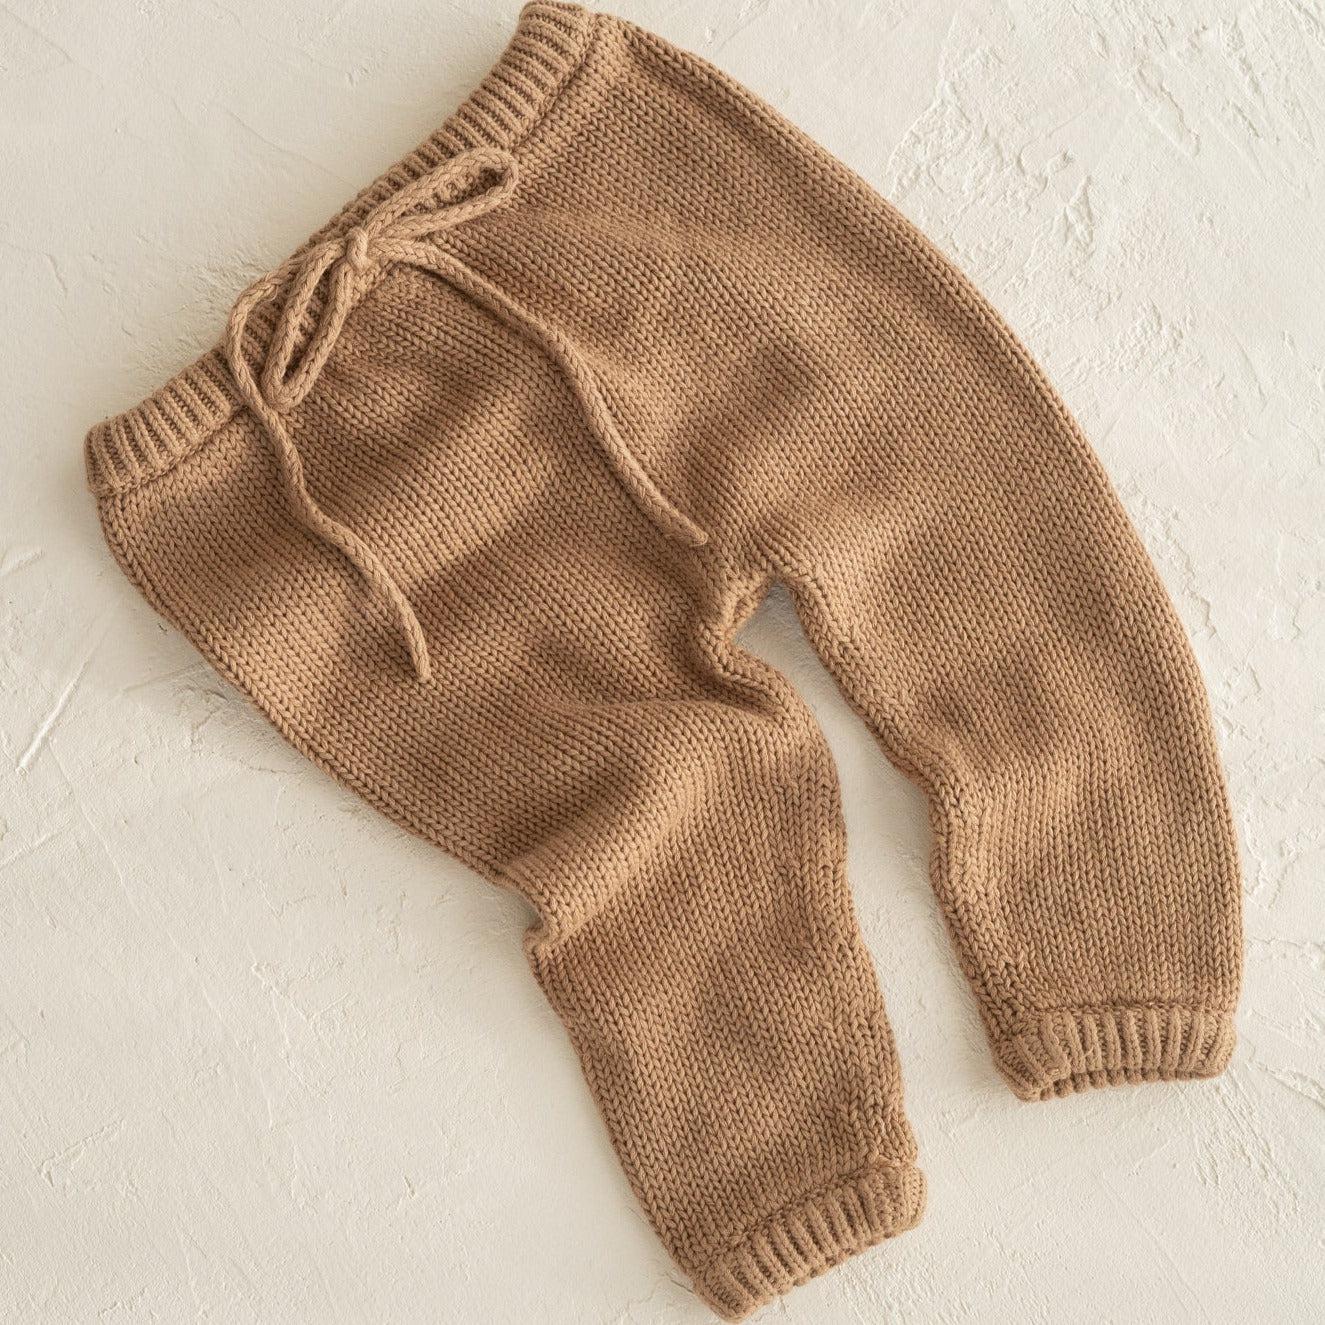 A baby's illoura poet pants in chocolate by Illoura the Label.